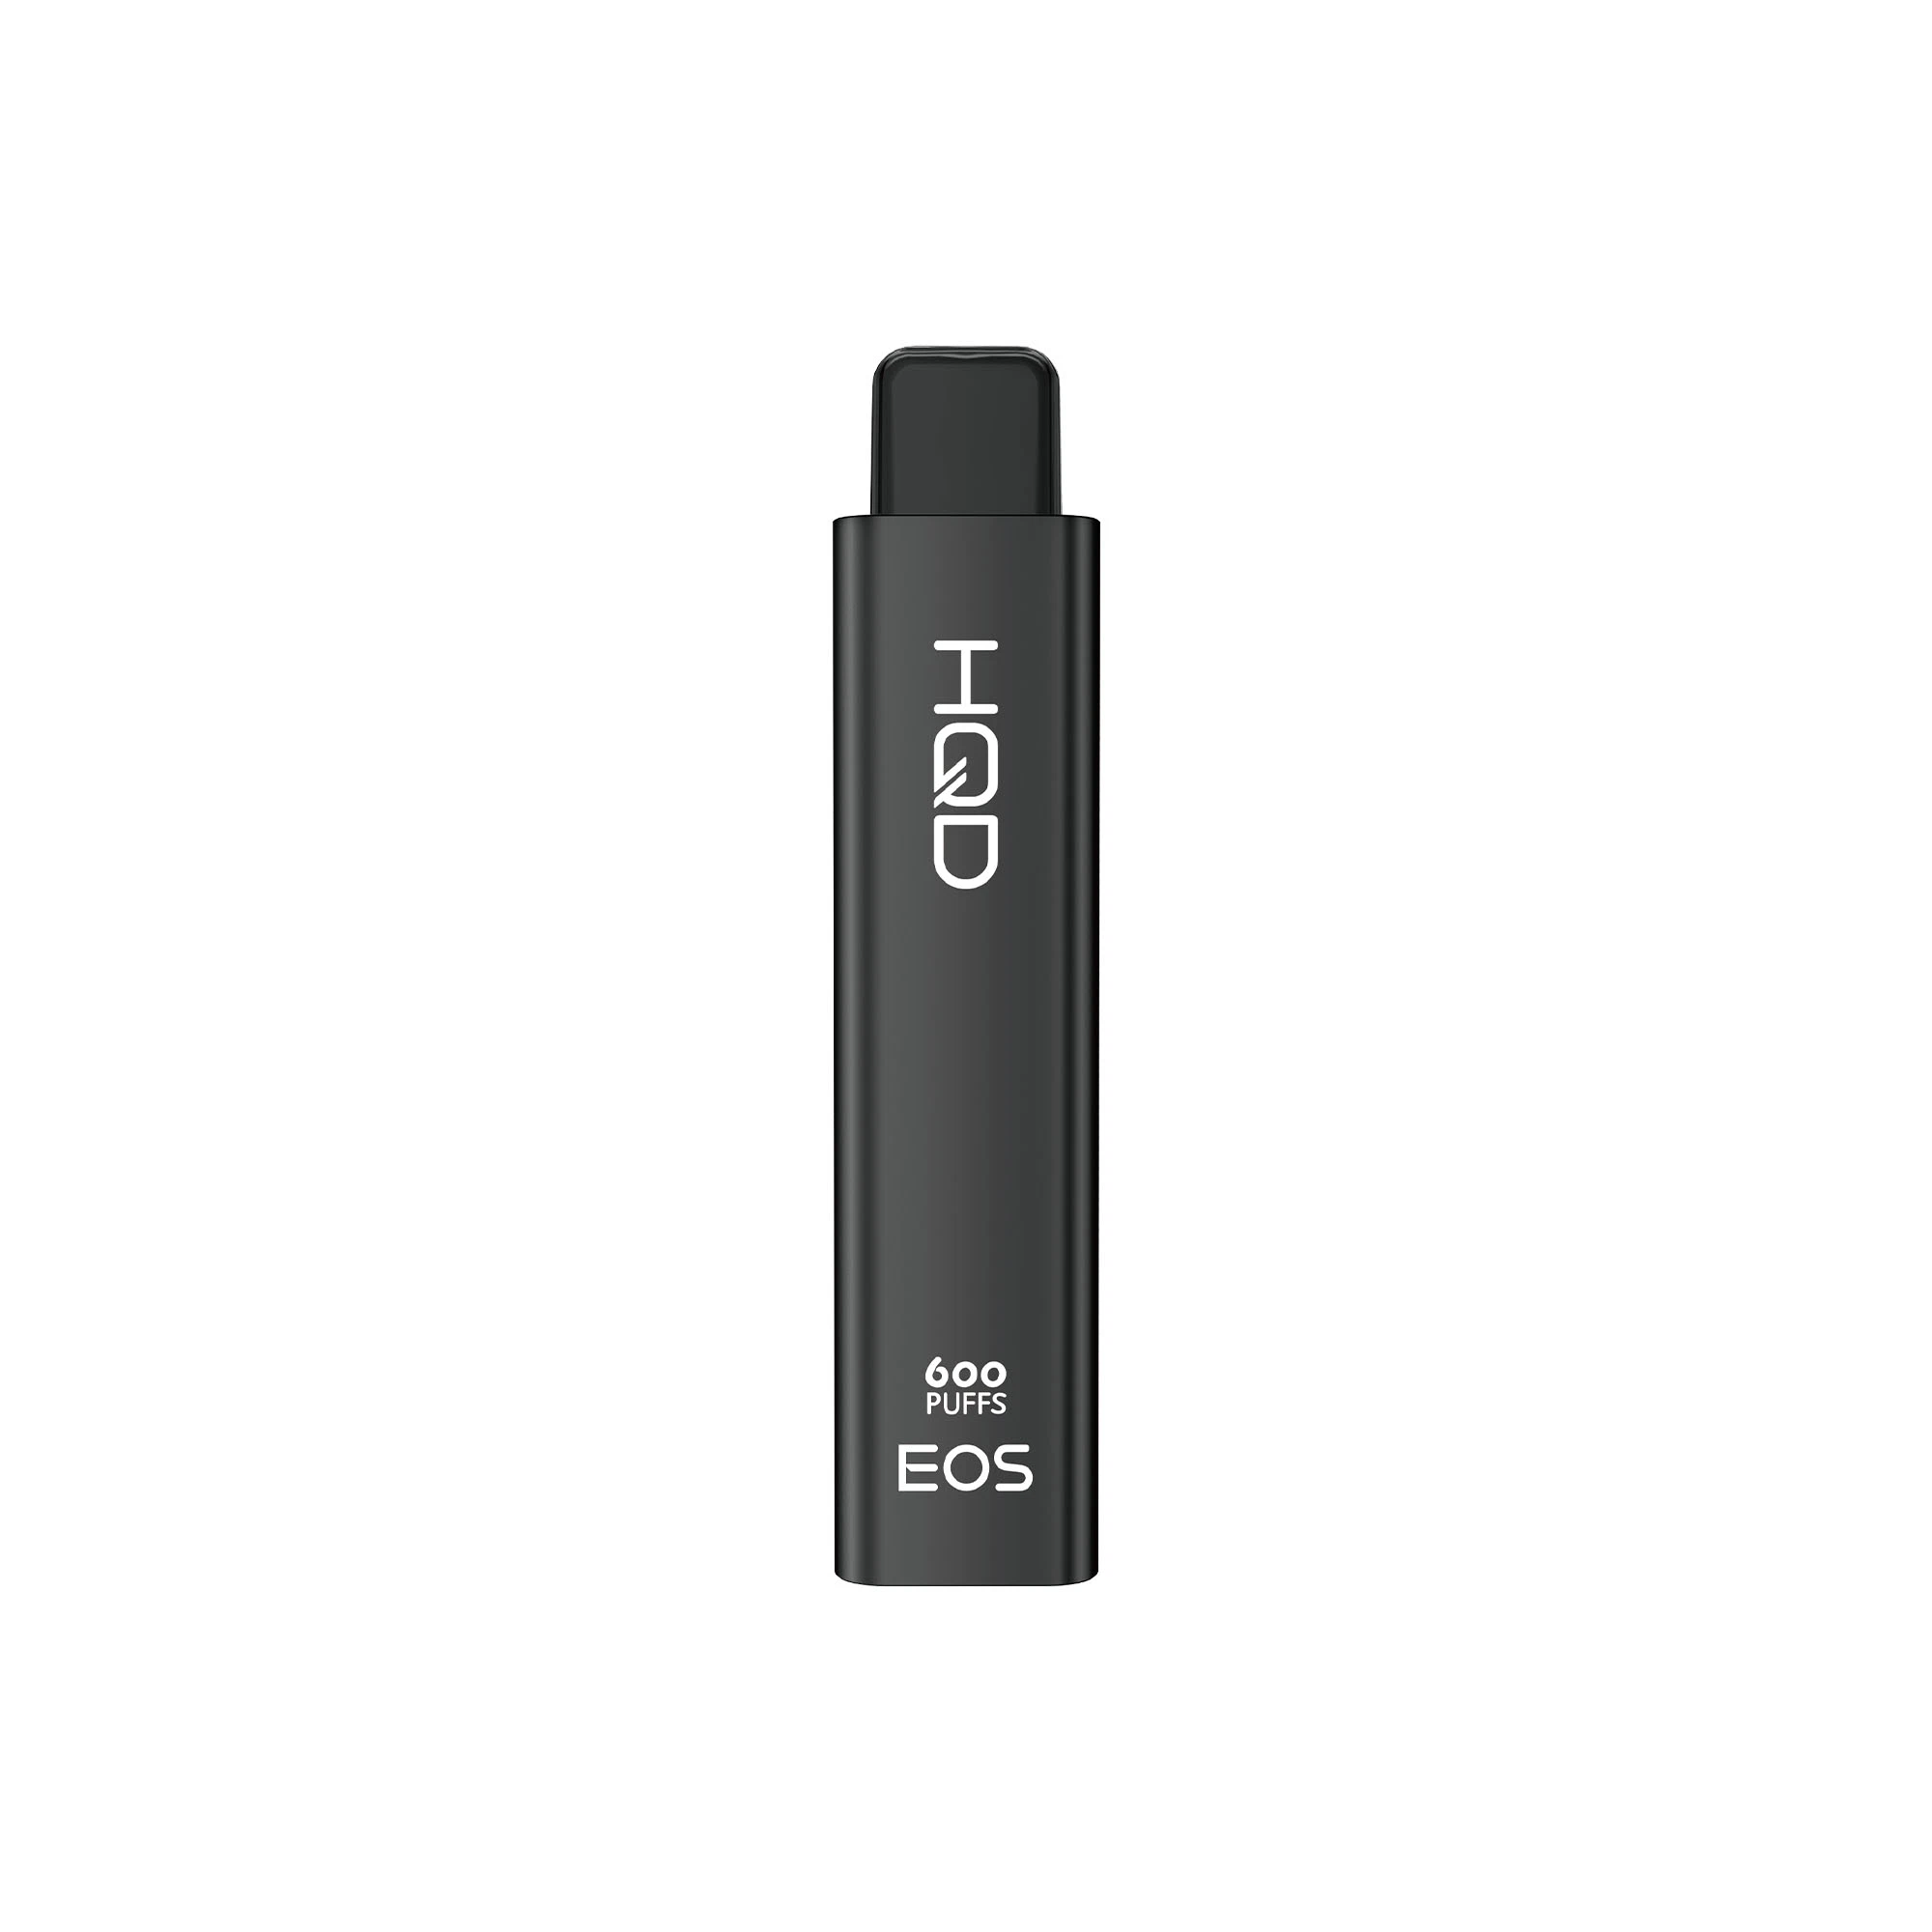 Tpd Hot Selling Disposable/Chargeable Vape Hqd EOS 600 Puffs Germany